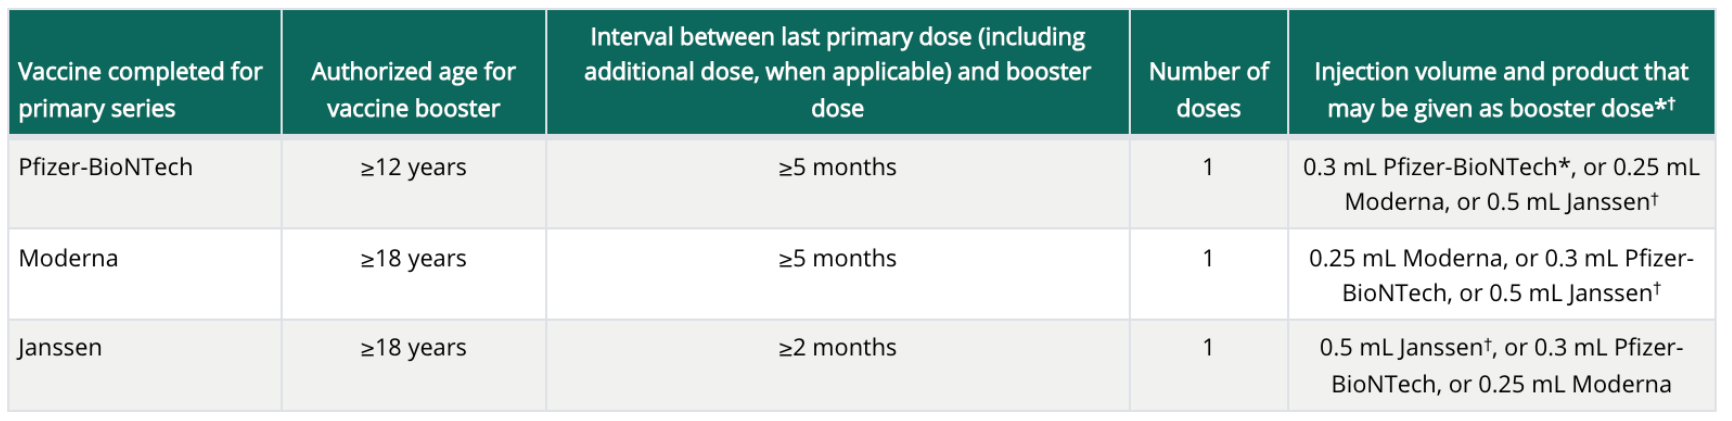 This table shows the booster dose for vaccines by primary series.